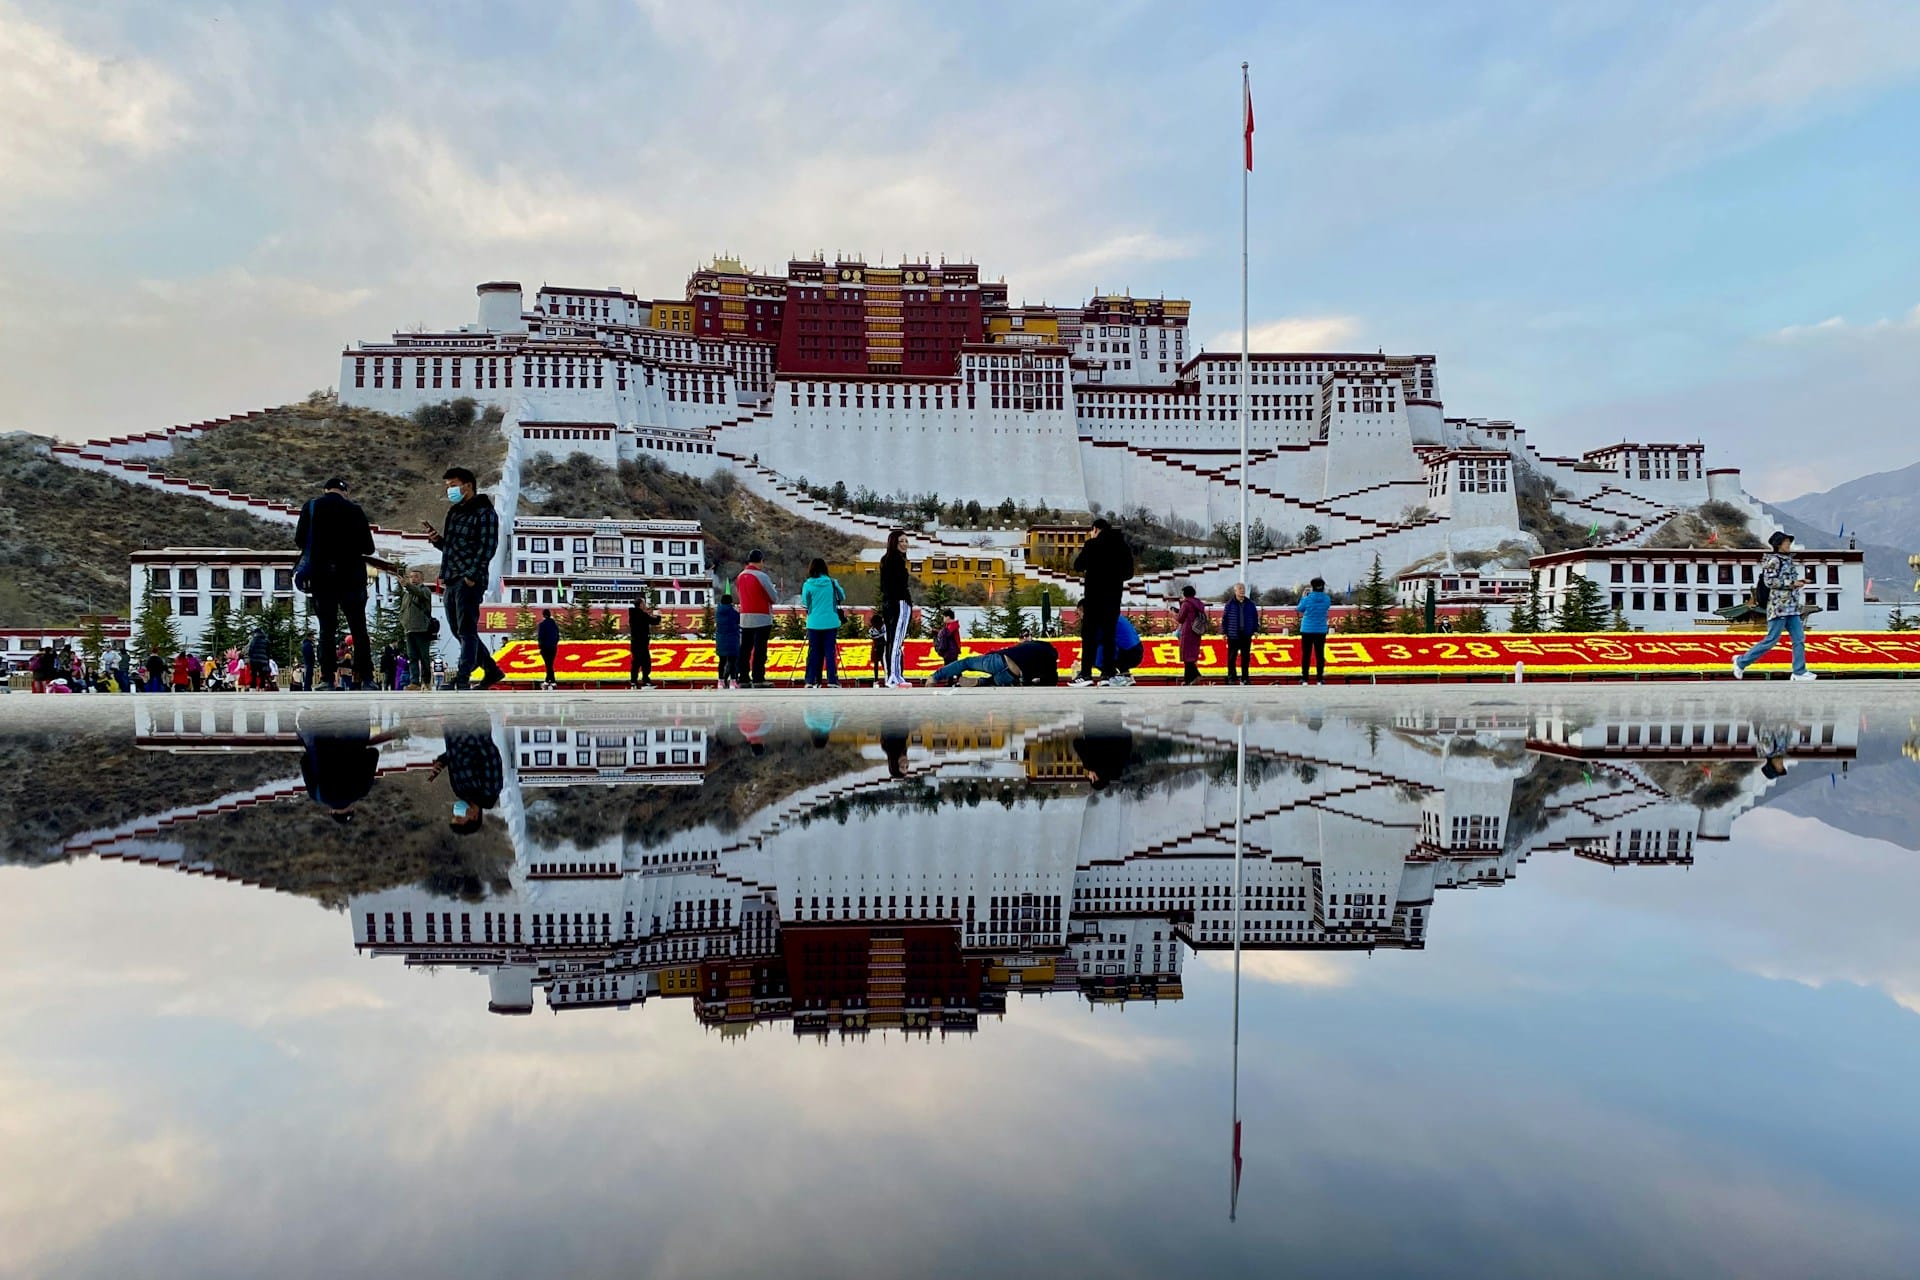 6 Tibet Travel Restrictions you should be aware of